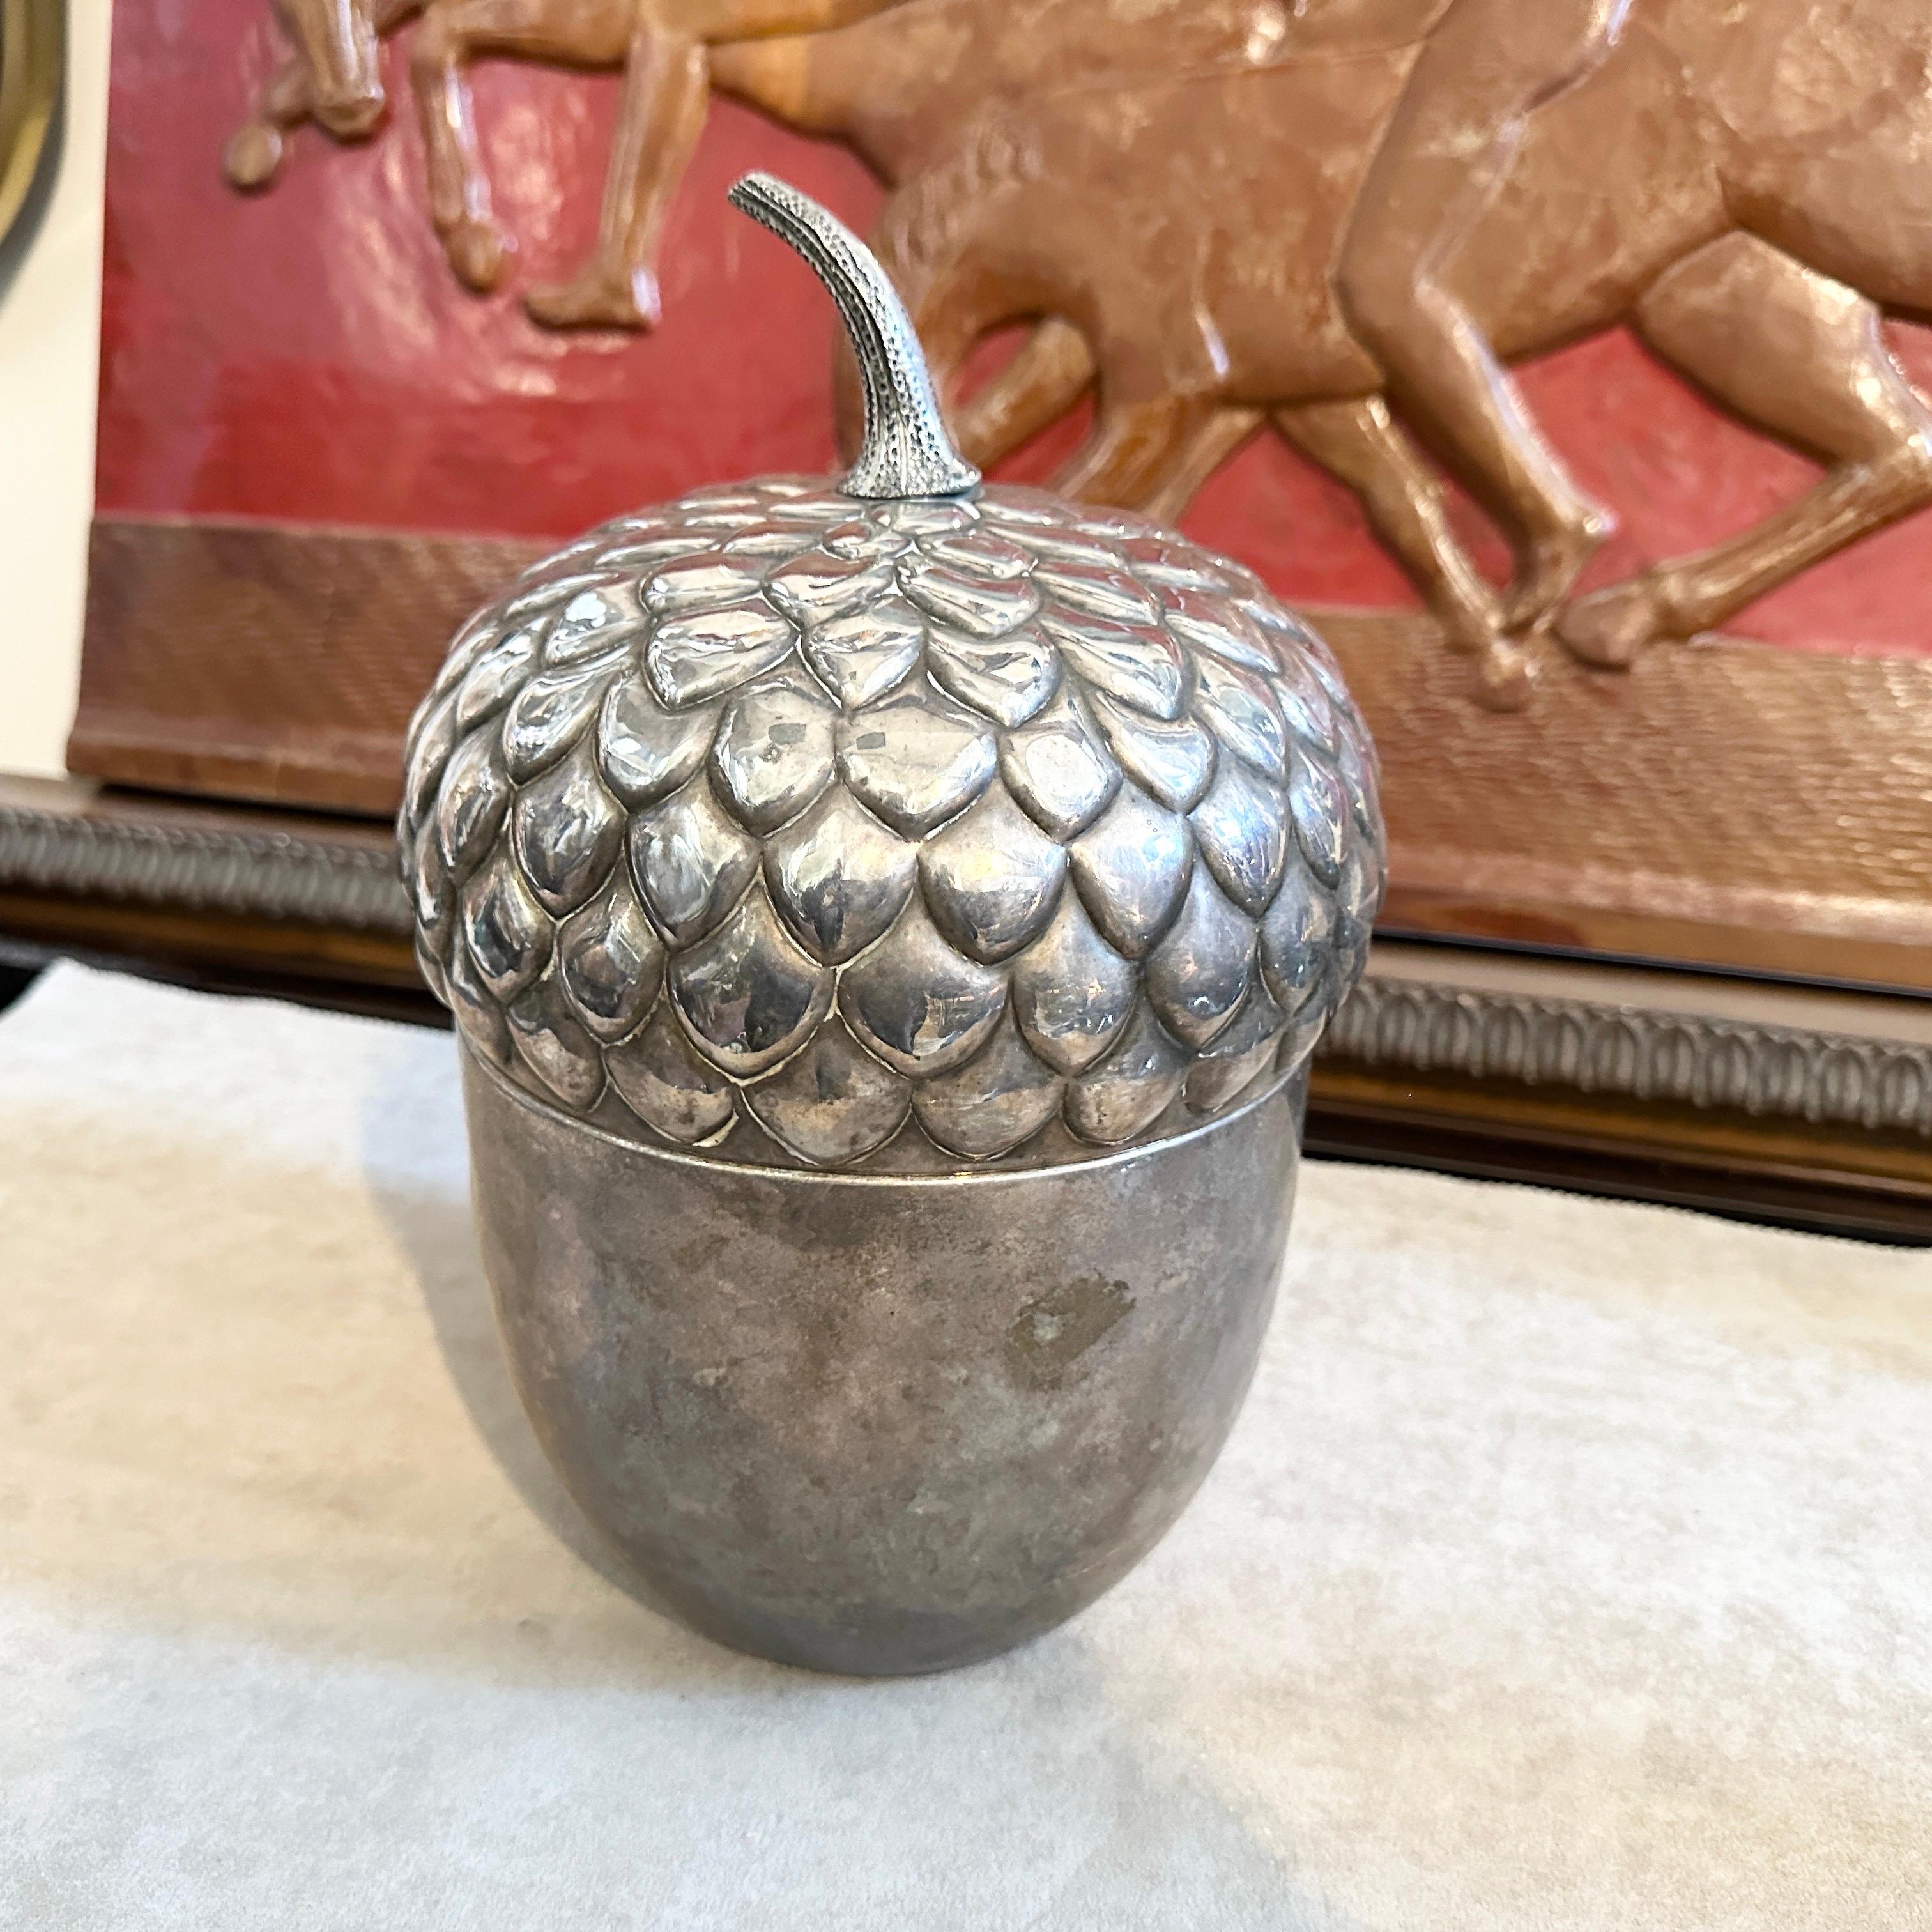 1970s Modernist Silver Plated Acorn Shaped Ice Bucket by Teghini Firenze For Sale 5